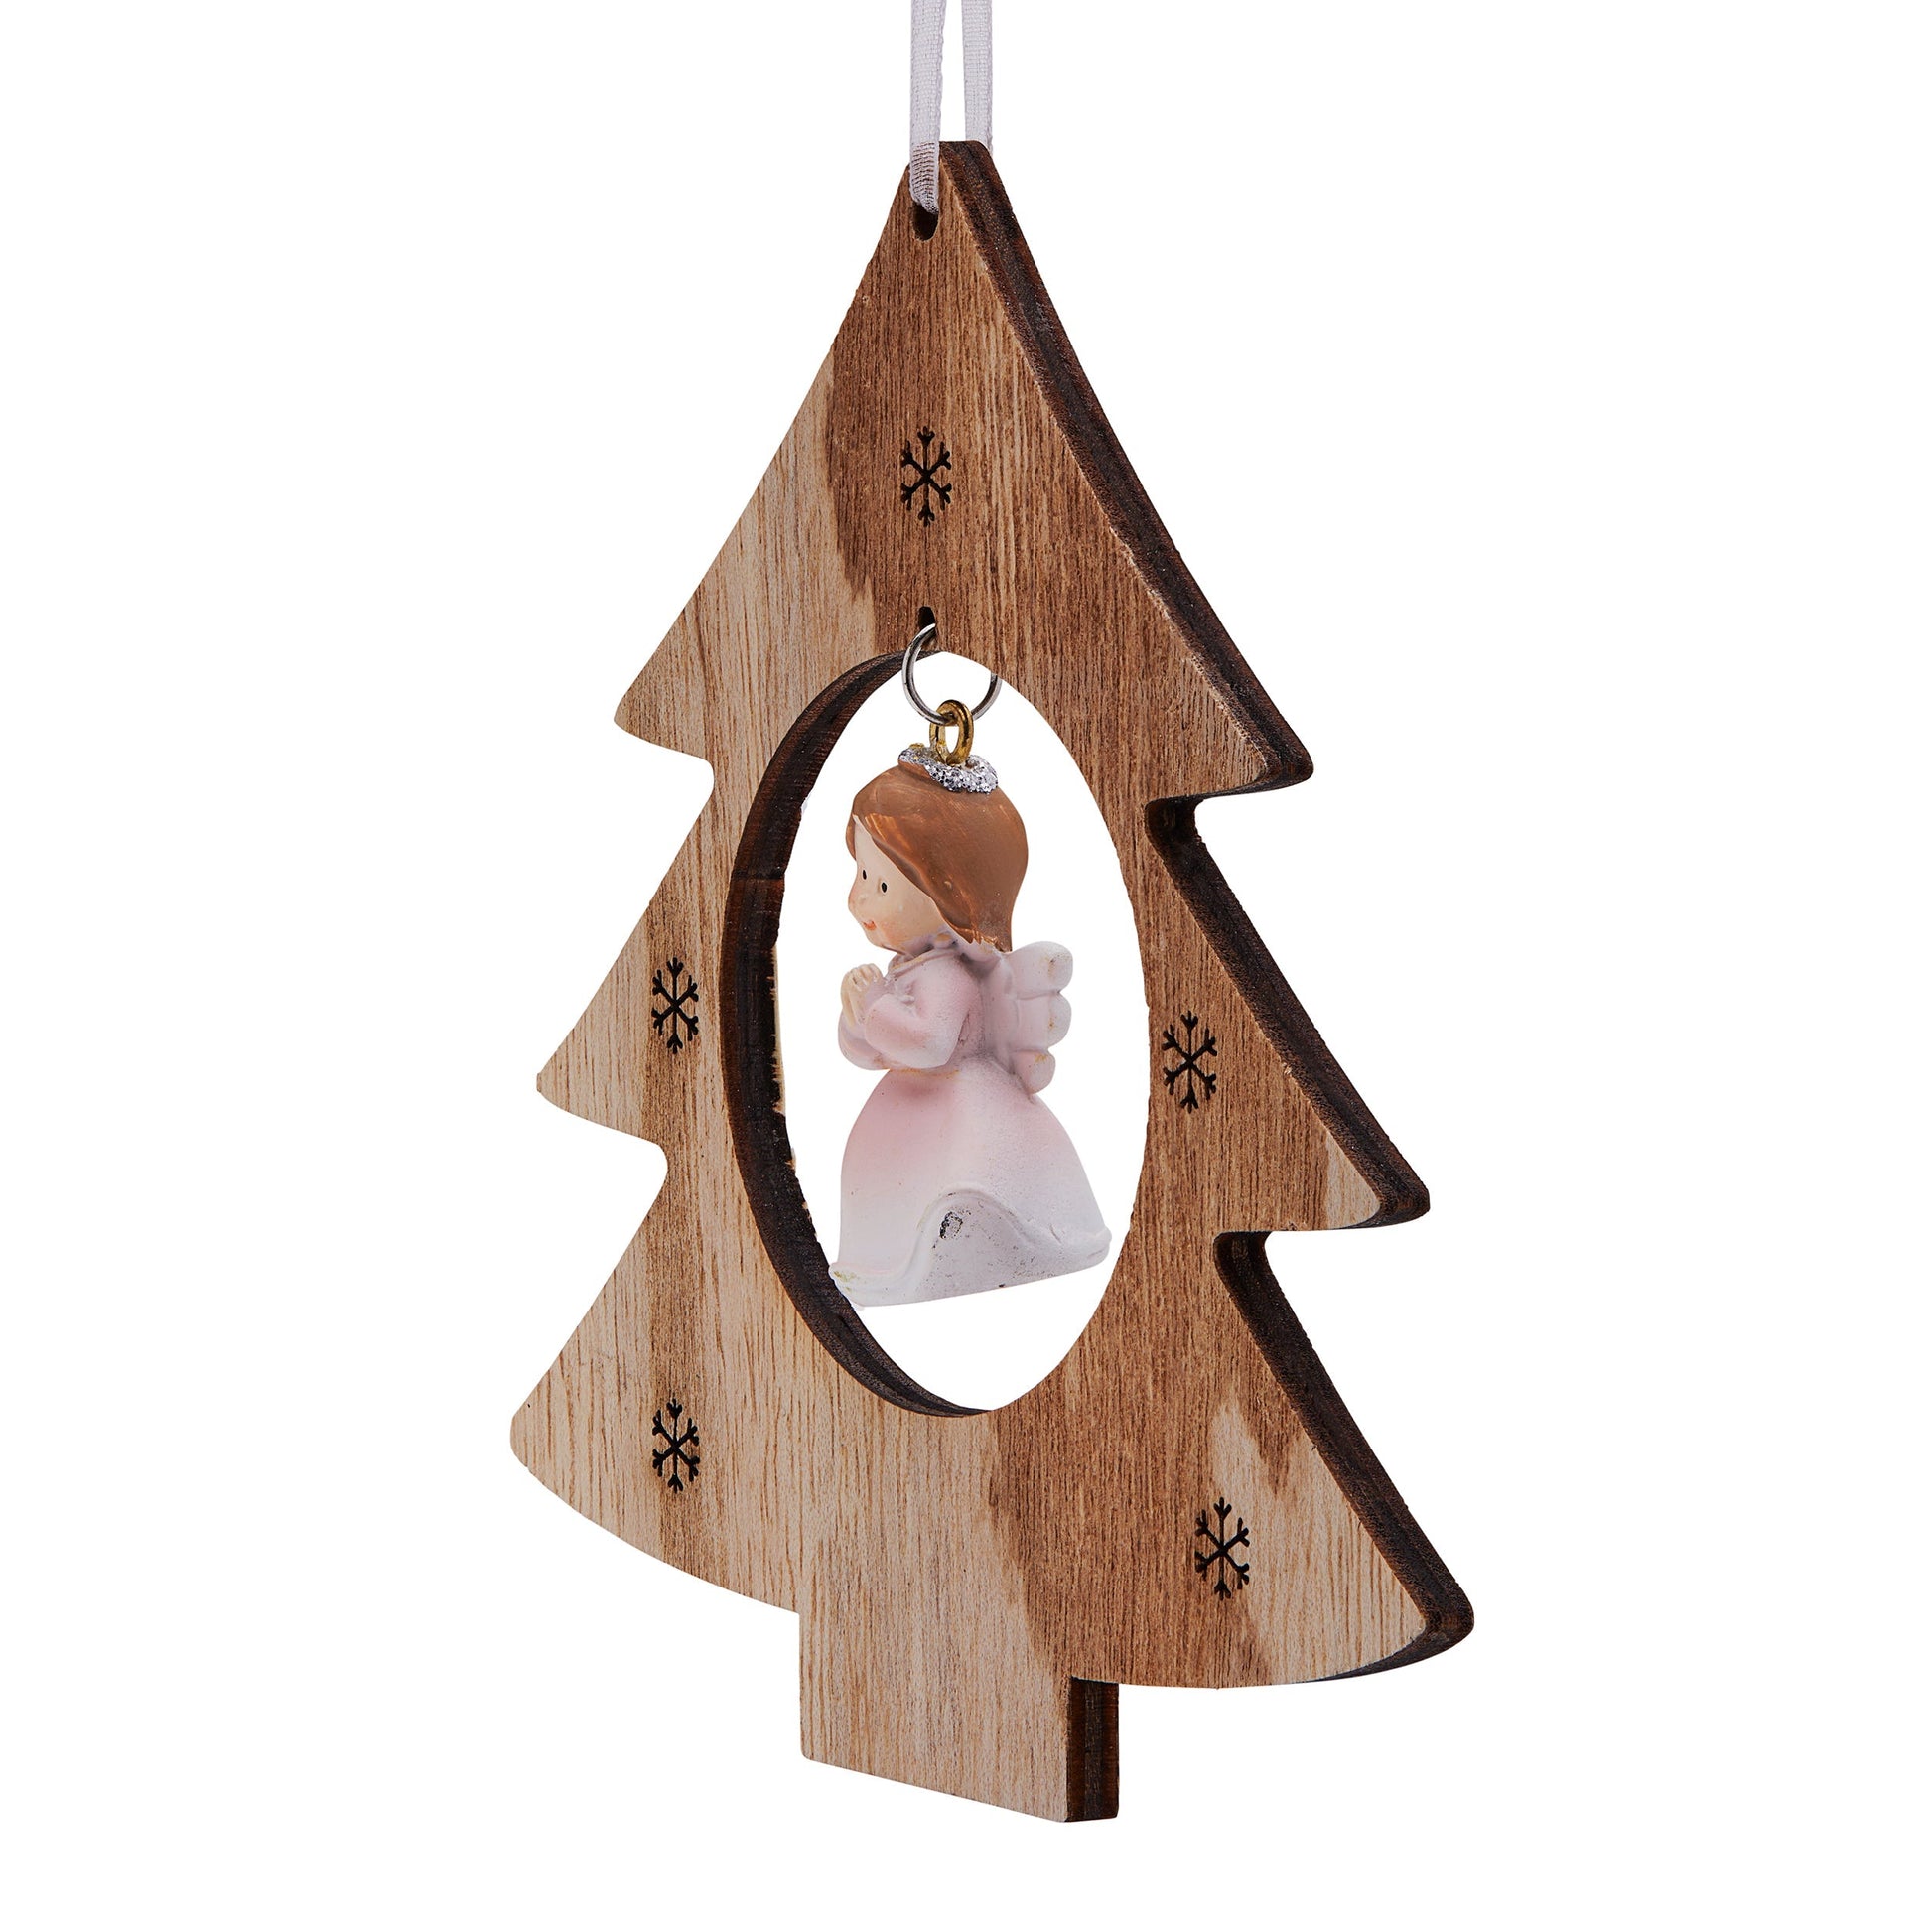 Mondo Cattolico 12 cm (4.72 in) Wooden Christmas Tree With Pink Resin Angel